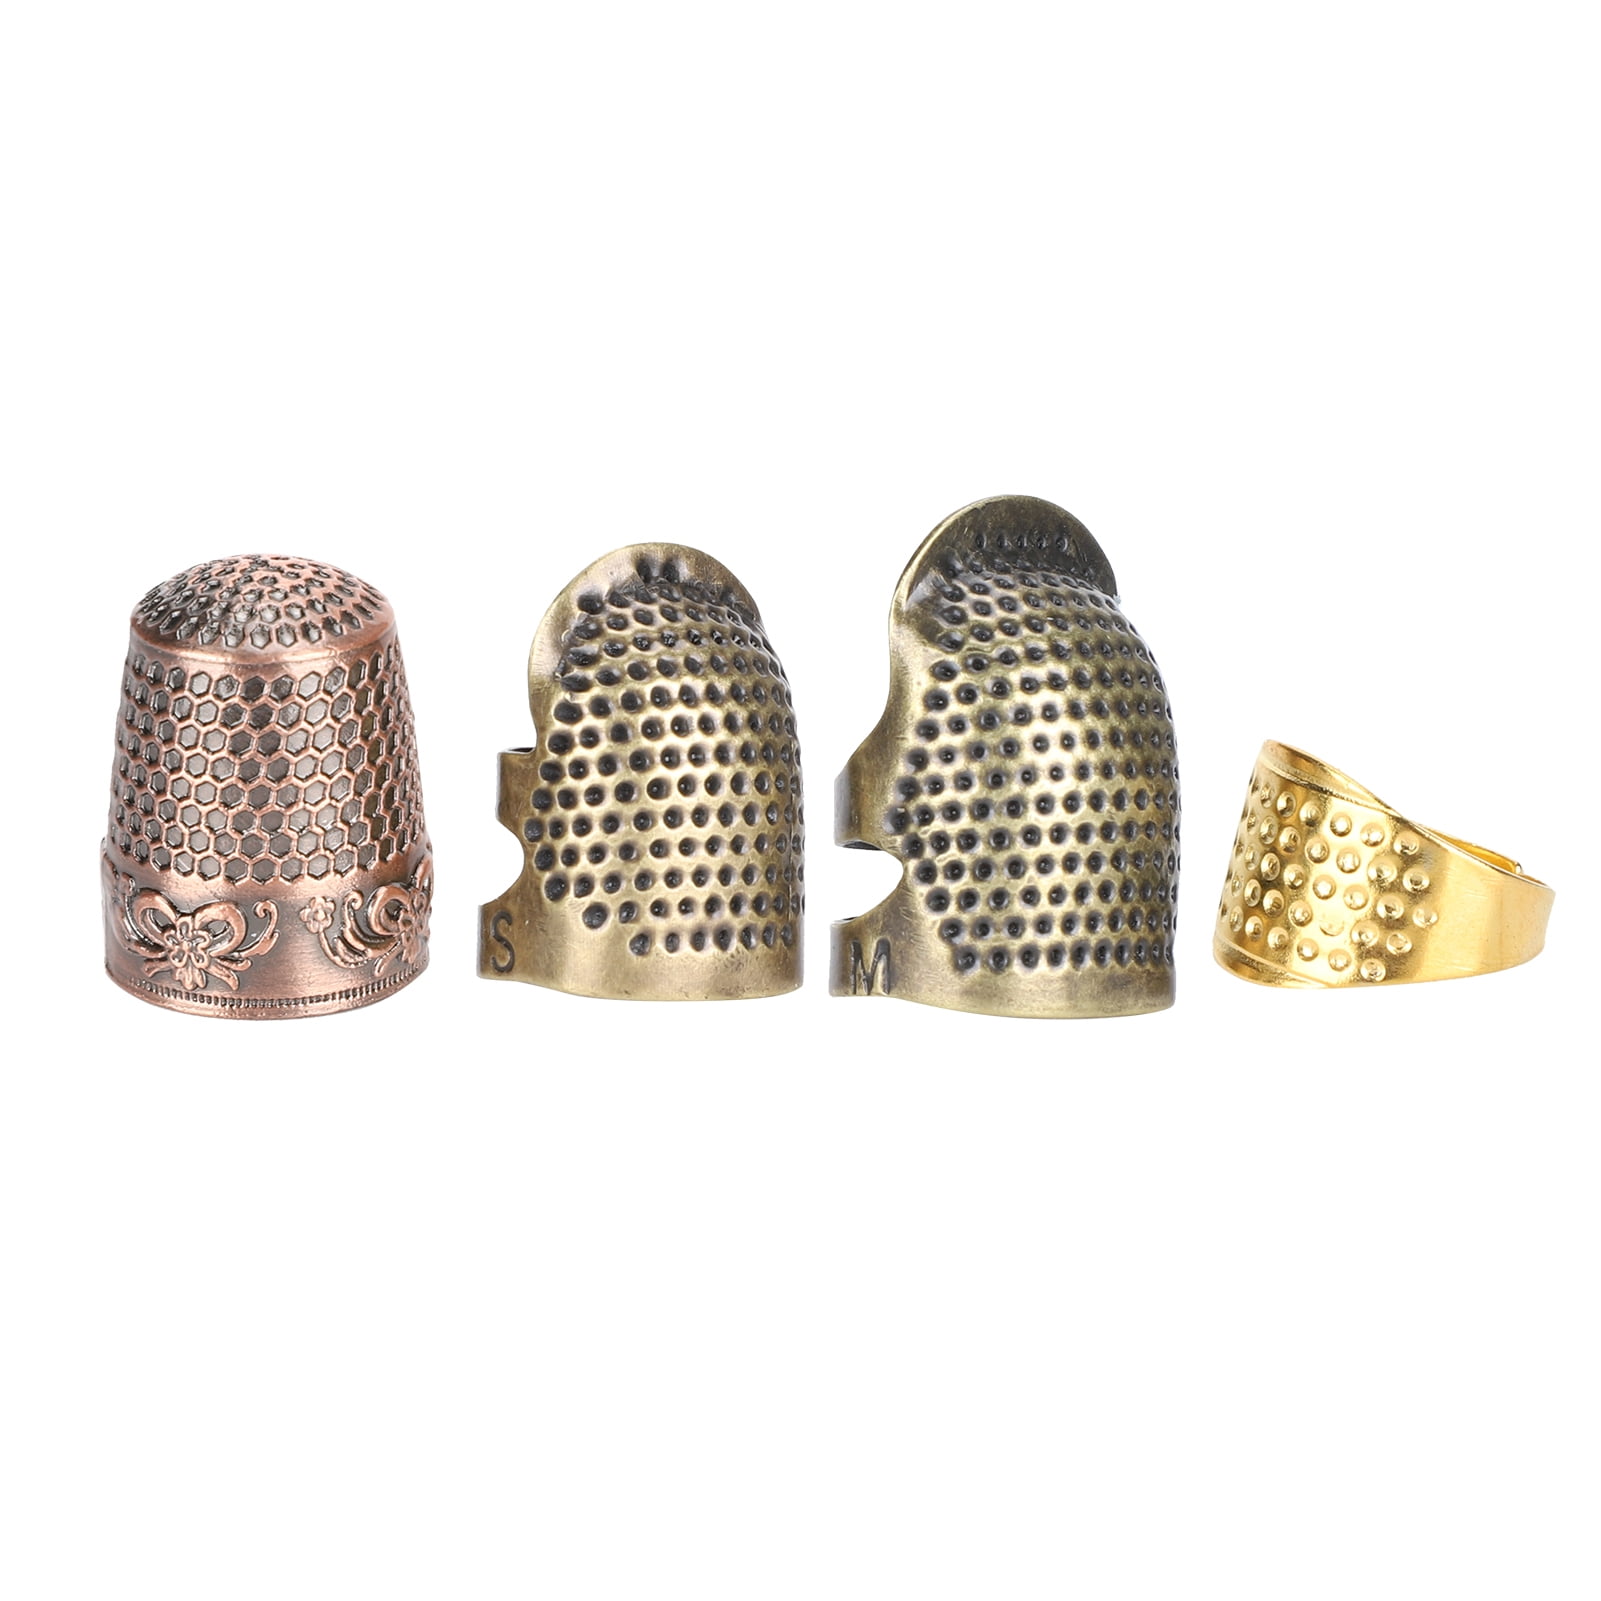 FINGER THIMBLE metal protector ADJUSTABLE sewing knitting quilting UK seller 